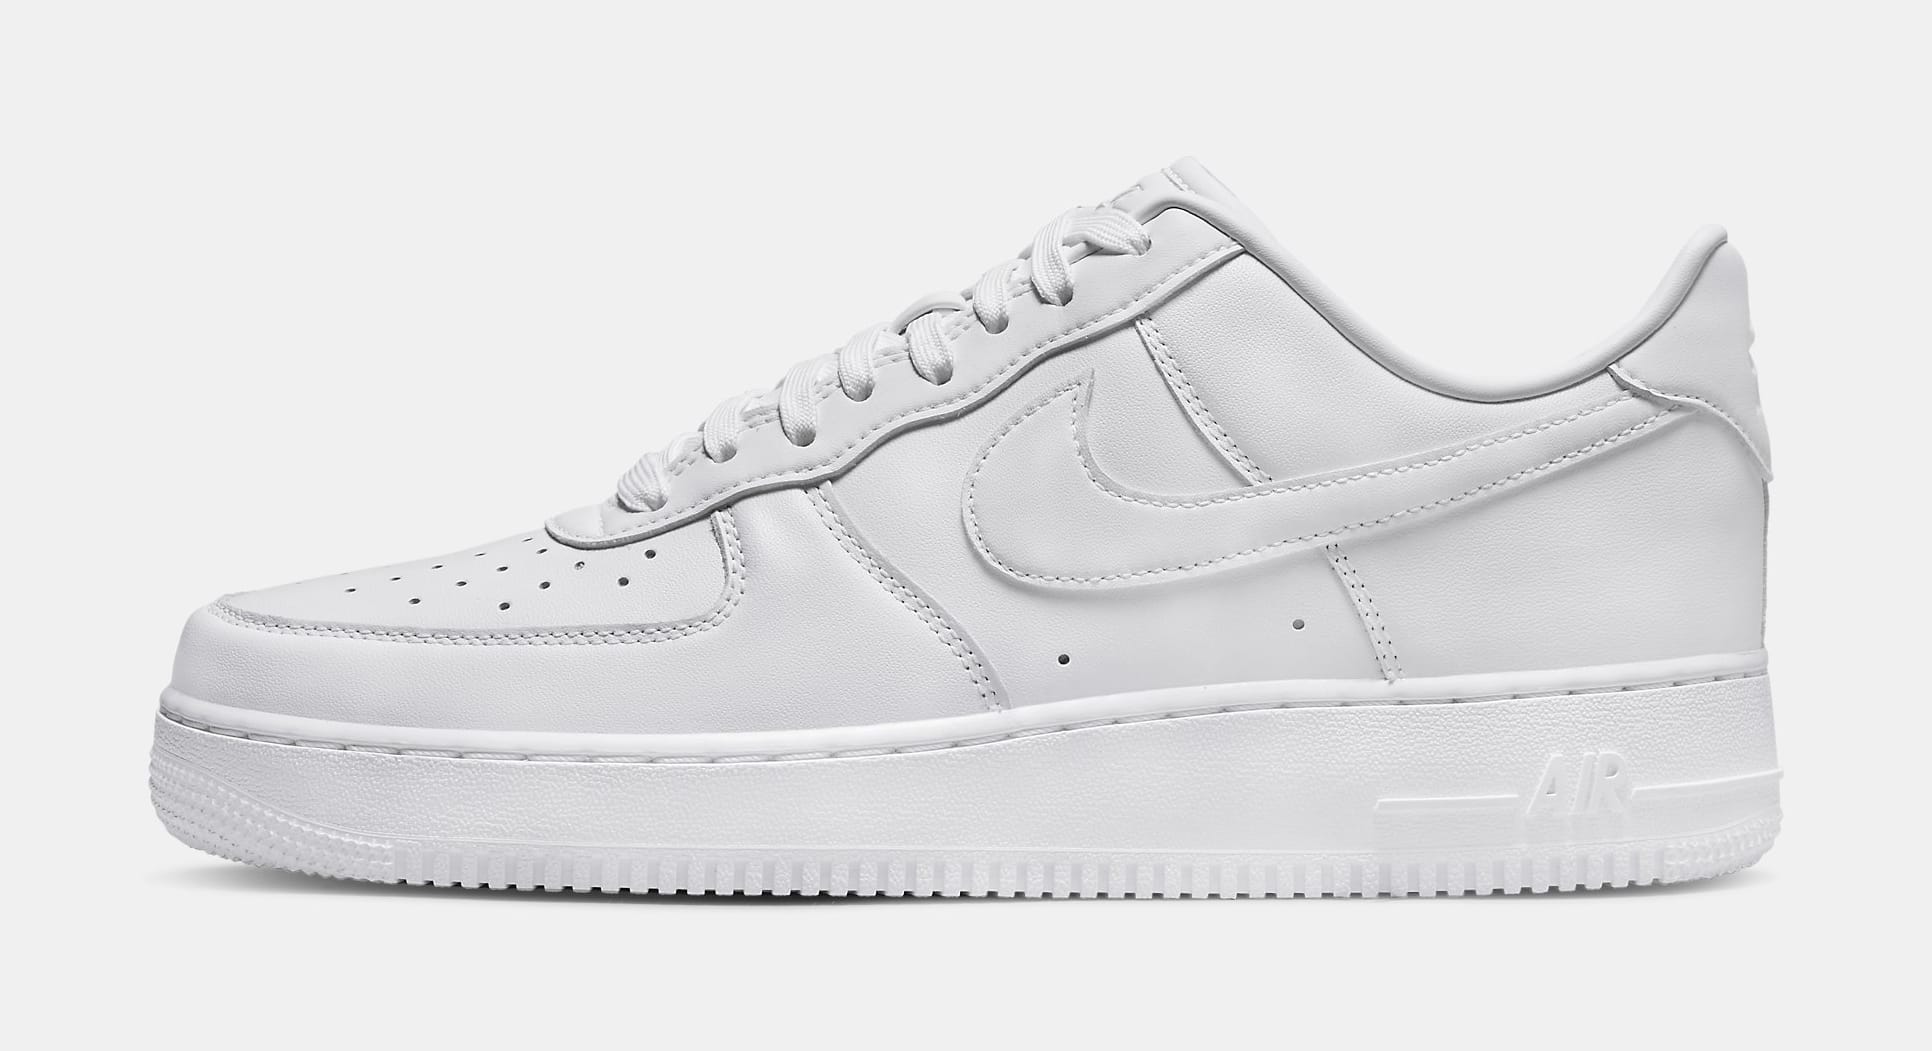 Nike Air Force 1 Low 'Fresh' DM0211 100 Lateral